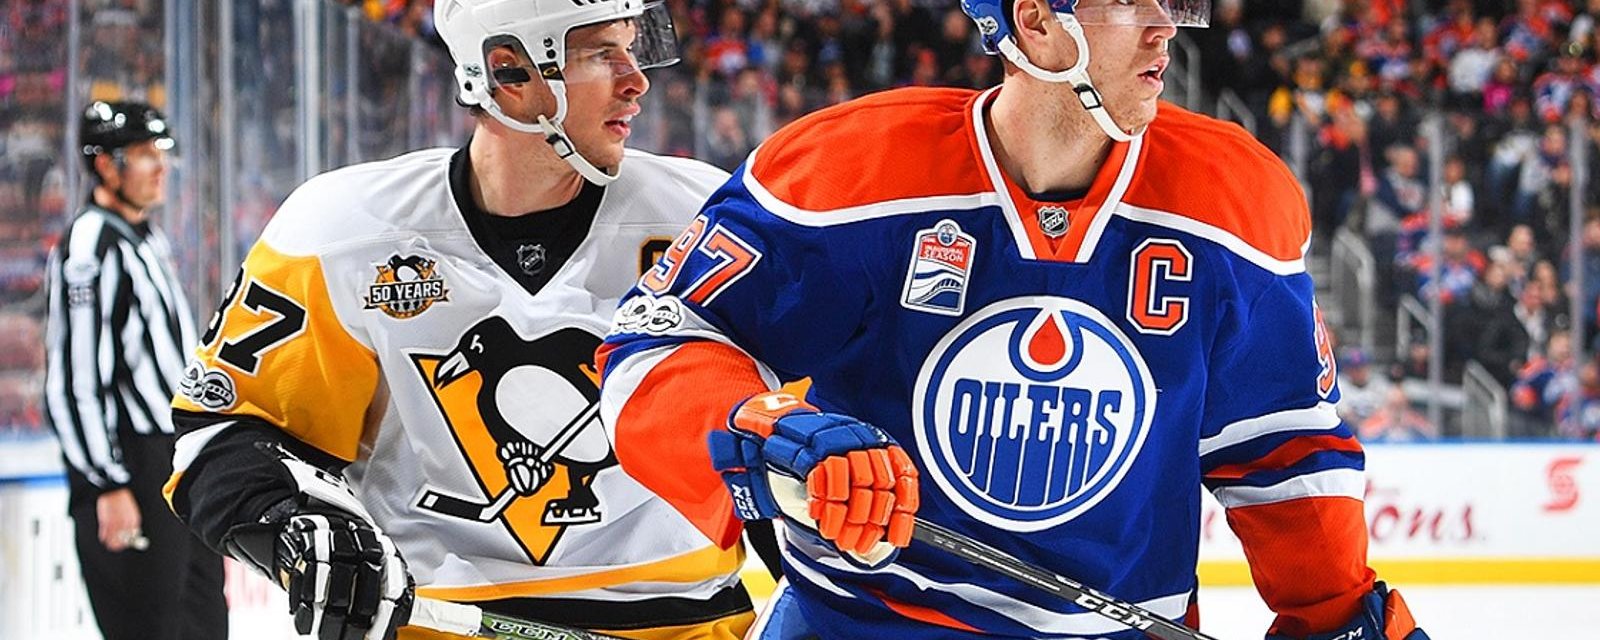 Sidney Crosby teams up with Connor McDavid for major overhaul of NHL rule